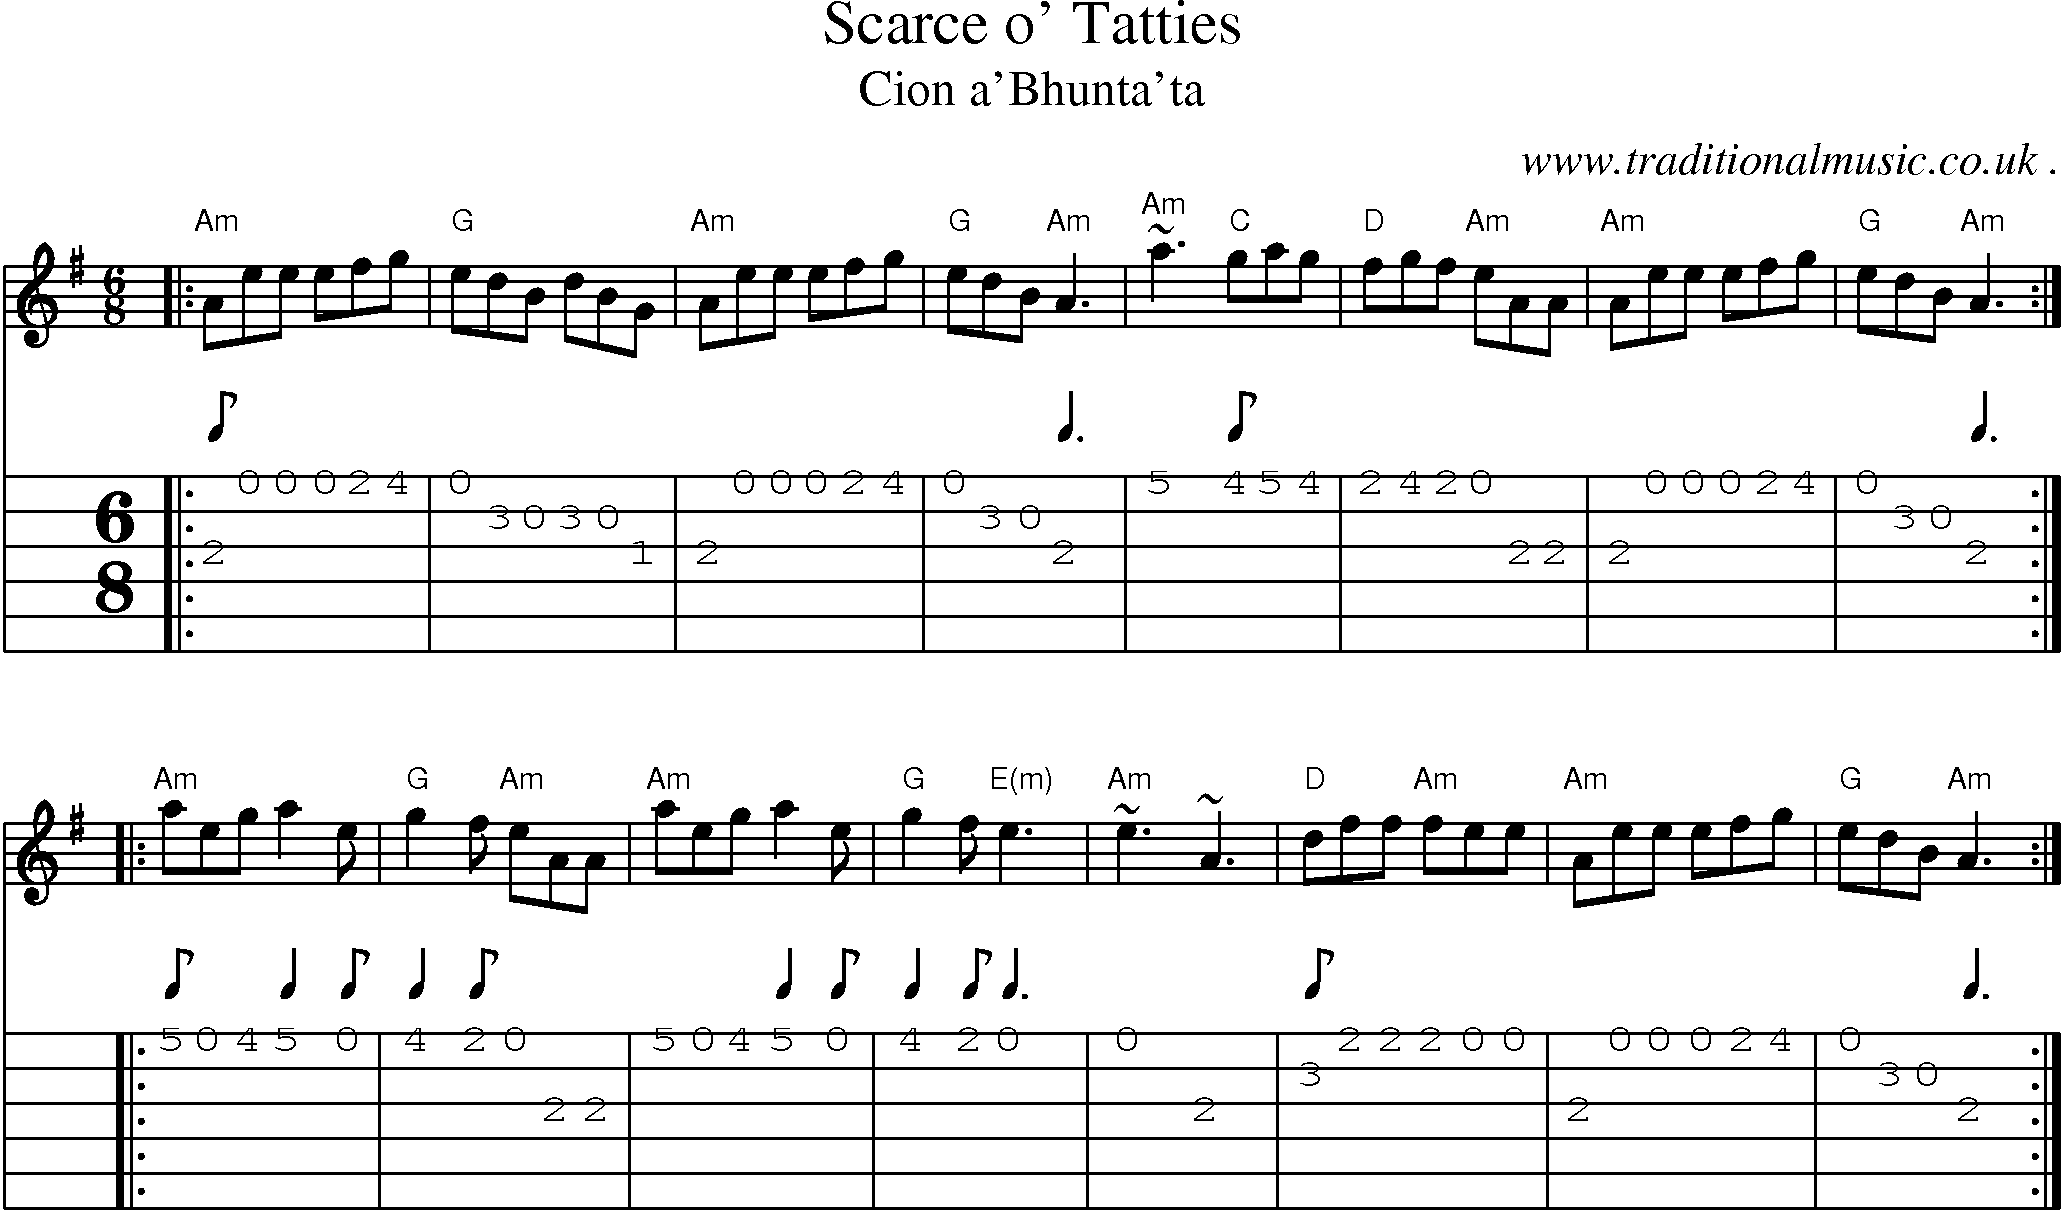 Sheet-music  score, Chords and Guitar Tabs for Scarce O Tatties